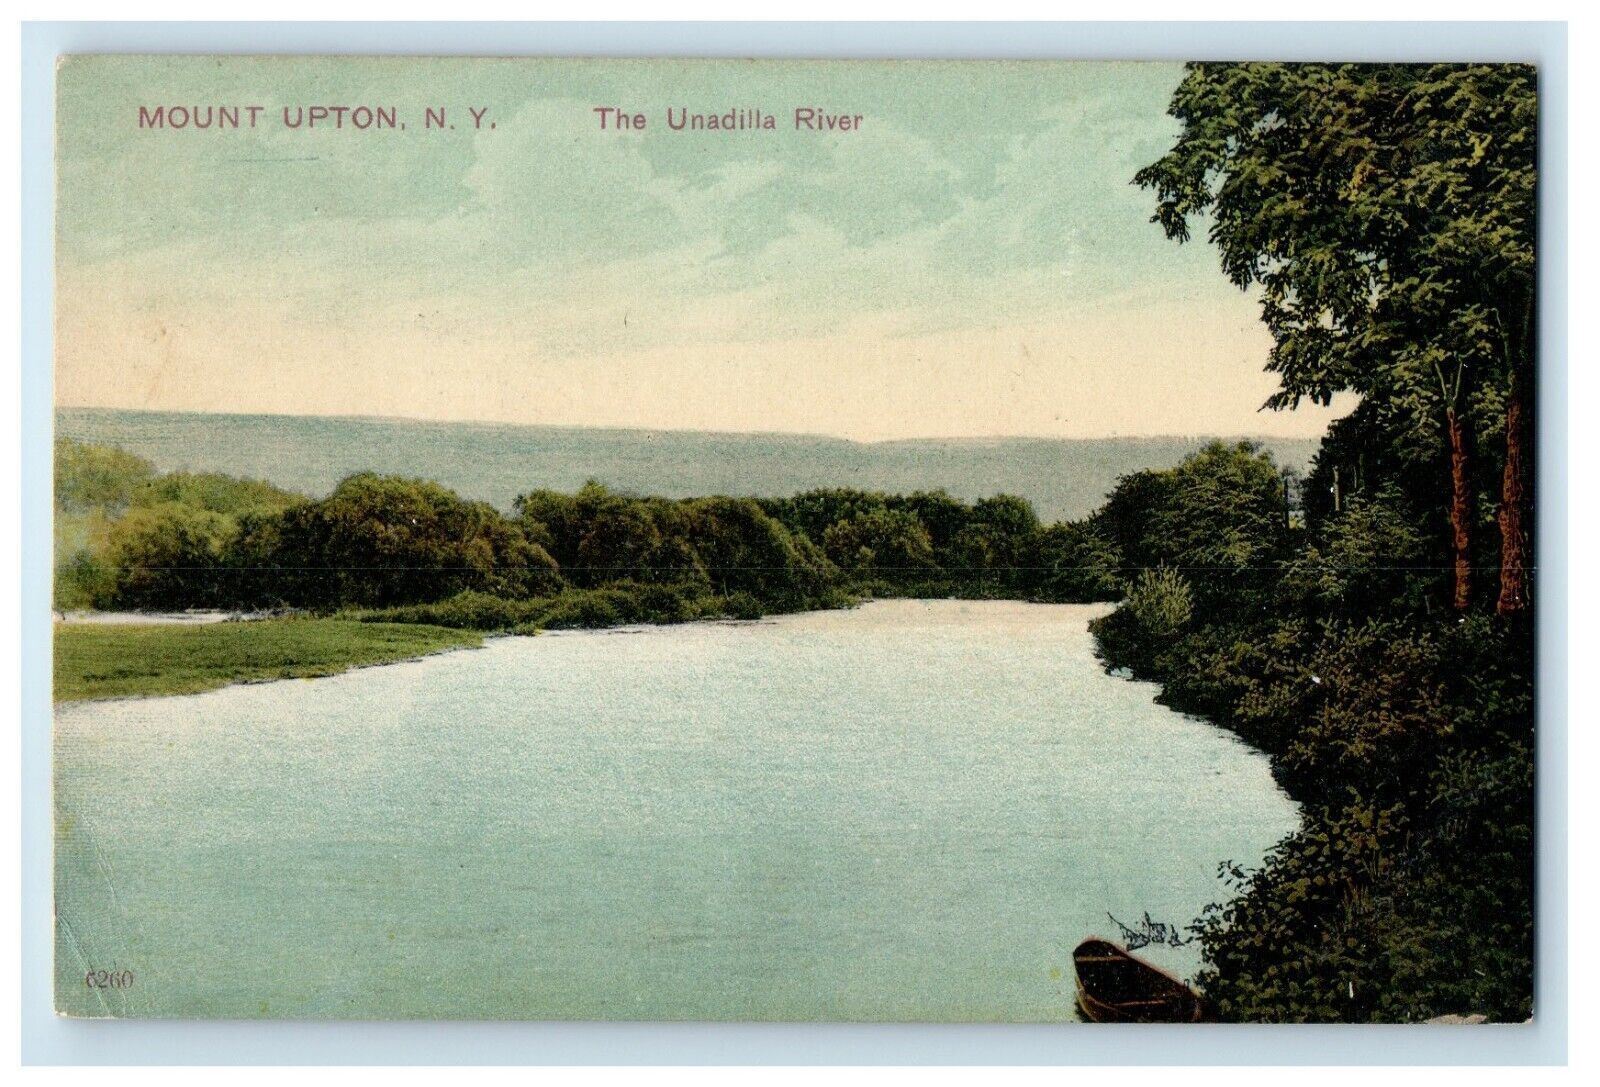 1913 Mount Upton New York NY, The Unadilla River View Posted Antique Postcard